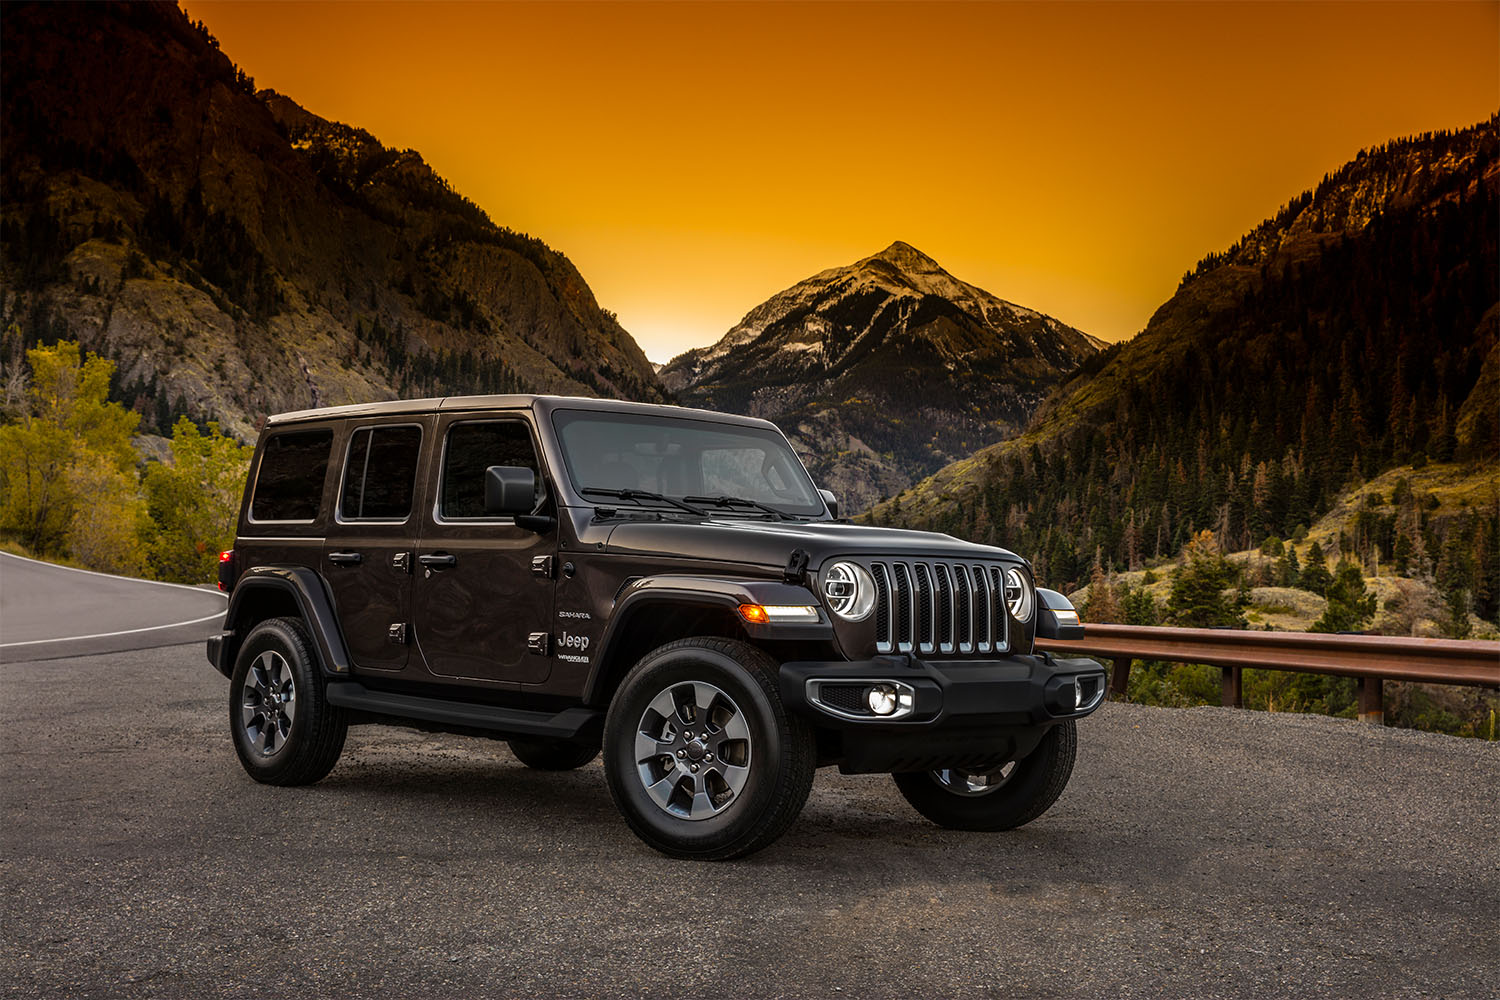 Jeep Wrangler Lease in Sterling Heights, MI | Sterling Heights DCJR